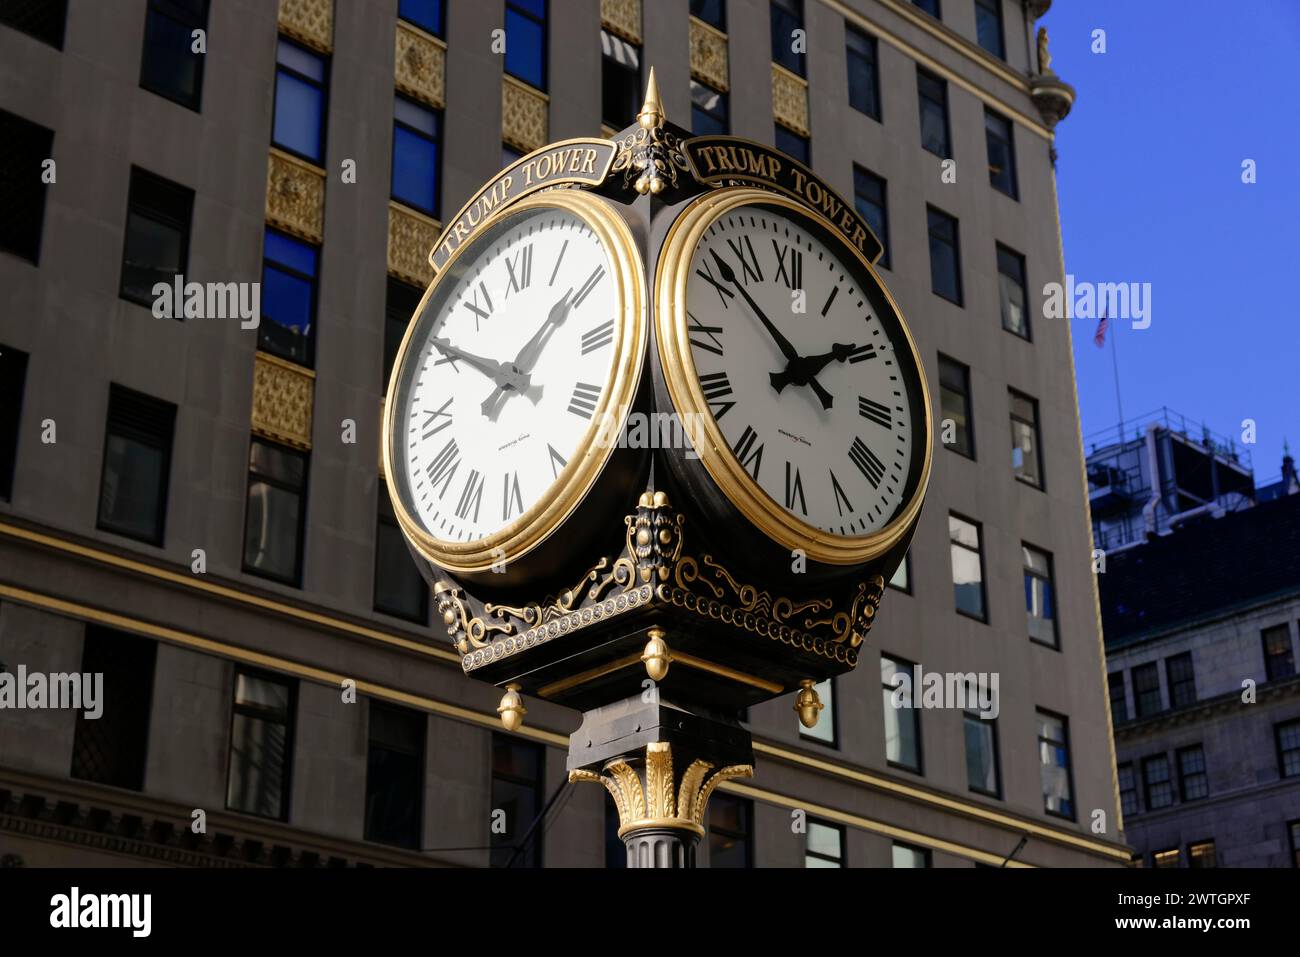 Illuminated golden street clock at night with a prominent building in the background, Manhattan, New York City, New York, USA, North America Stock Photo